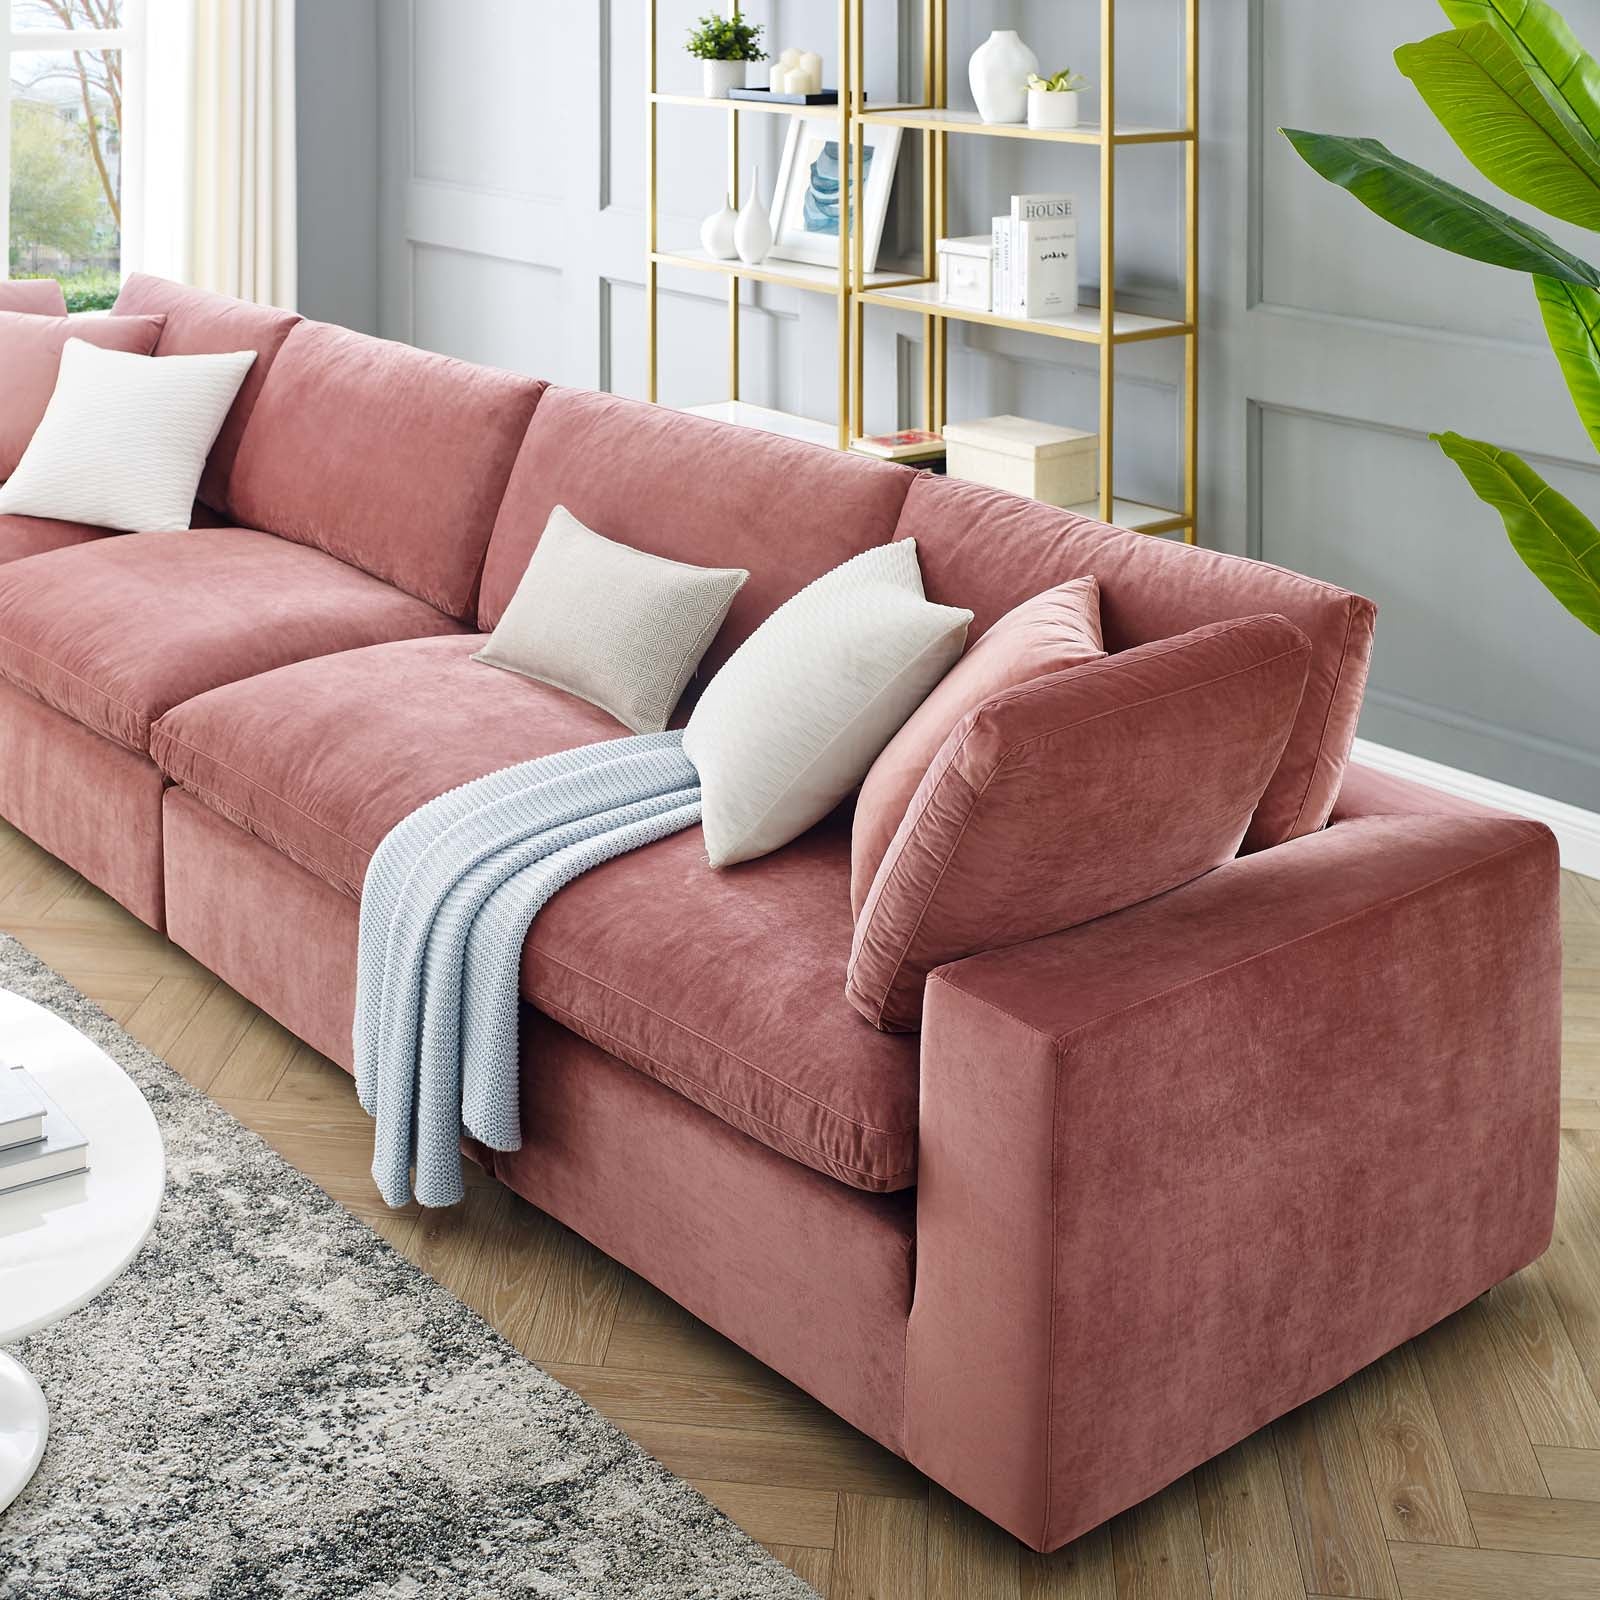 Modway Sectional Sofas - Commix Down Filled Overstuffed Performance Velvet 4-Seater Sofa Dusty Rose